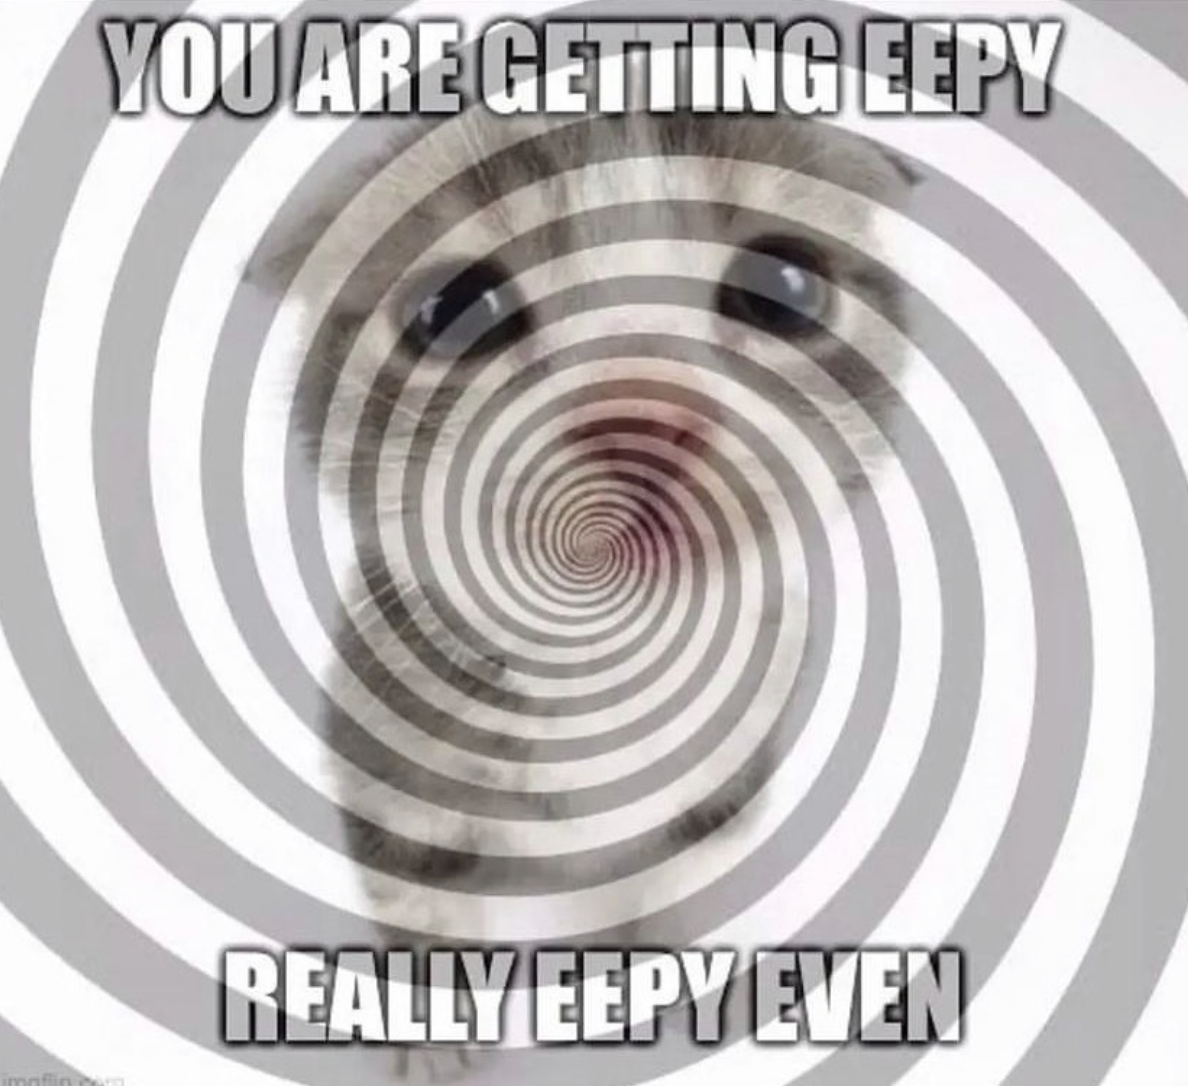 A meme of a cat and a hypnotic spiral, captioned 'You are getting eepy, really eepy even'